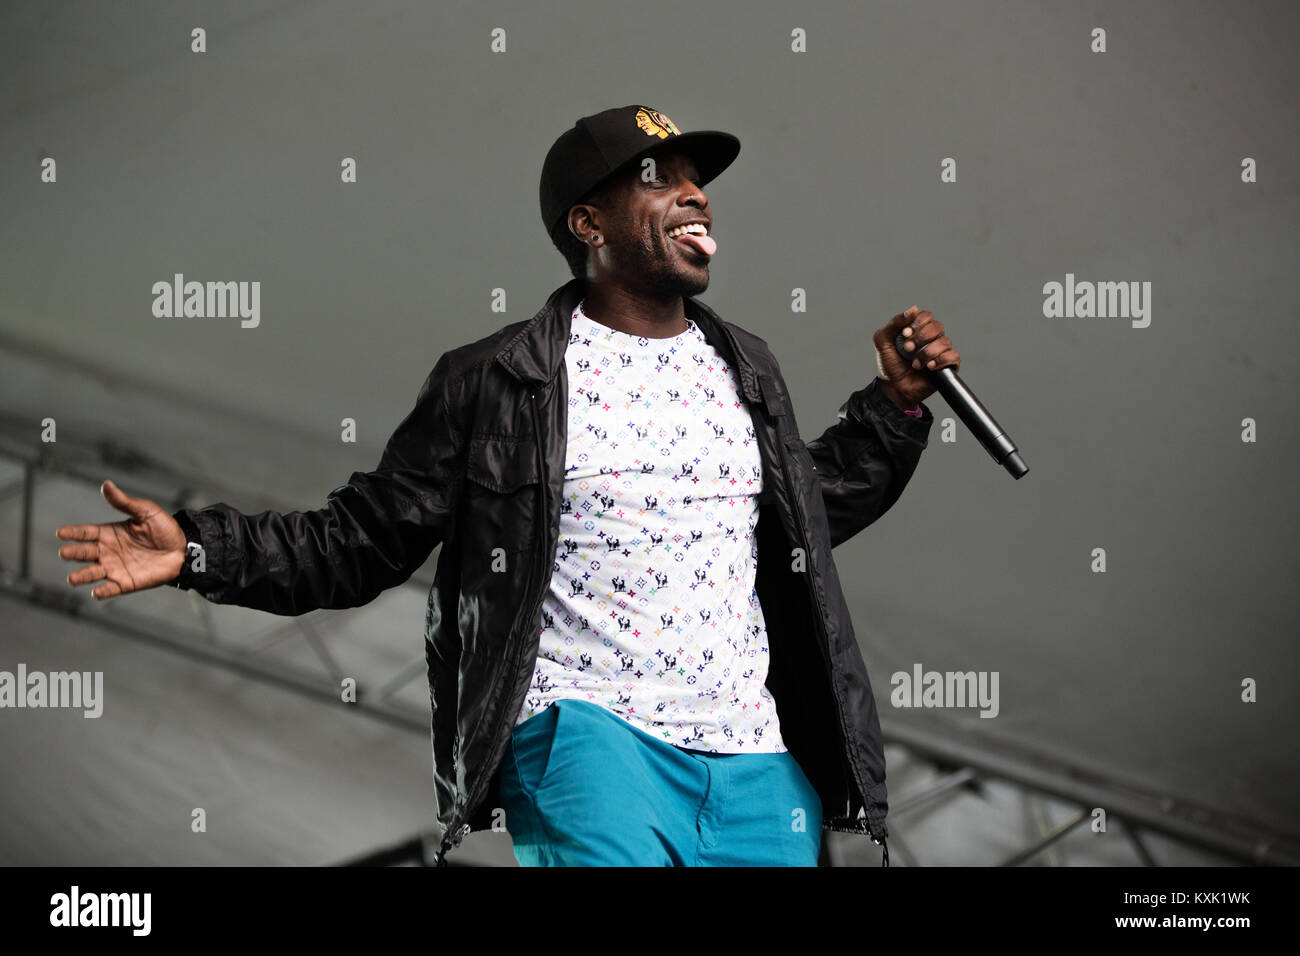 The American rap and hip hop group The Pharcyde performs a live concert at  Vanguard Festival 2014 in Copenhagen. Here rapper Imani is pictured live on  stage. Denmark, 02/08 2014 Stock Photo - Alamy